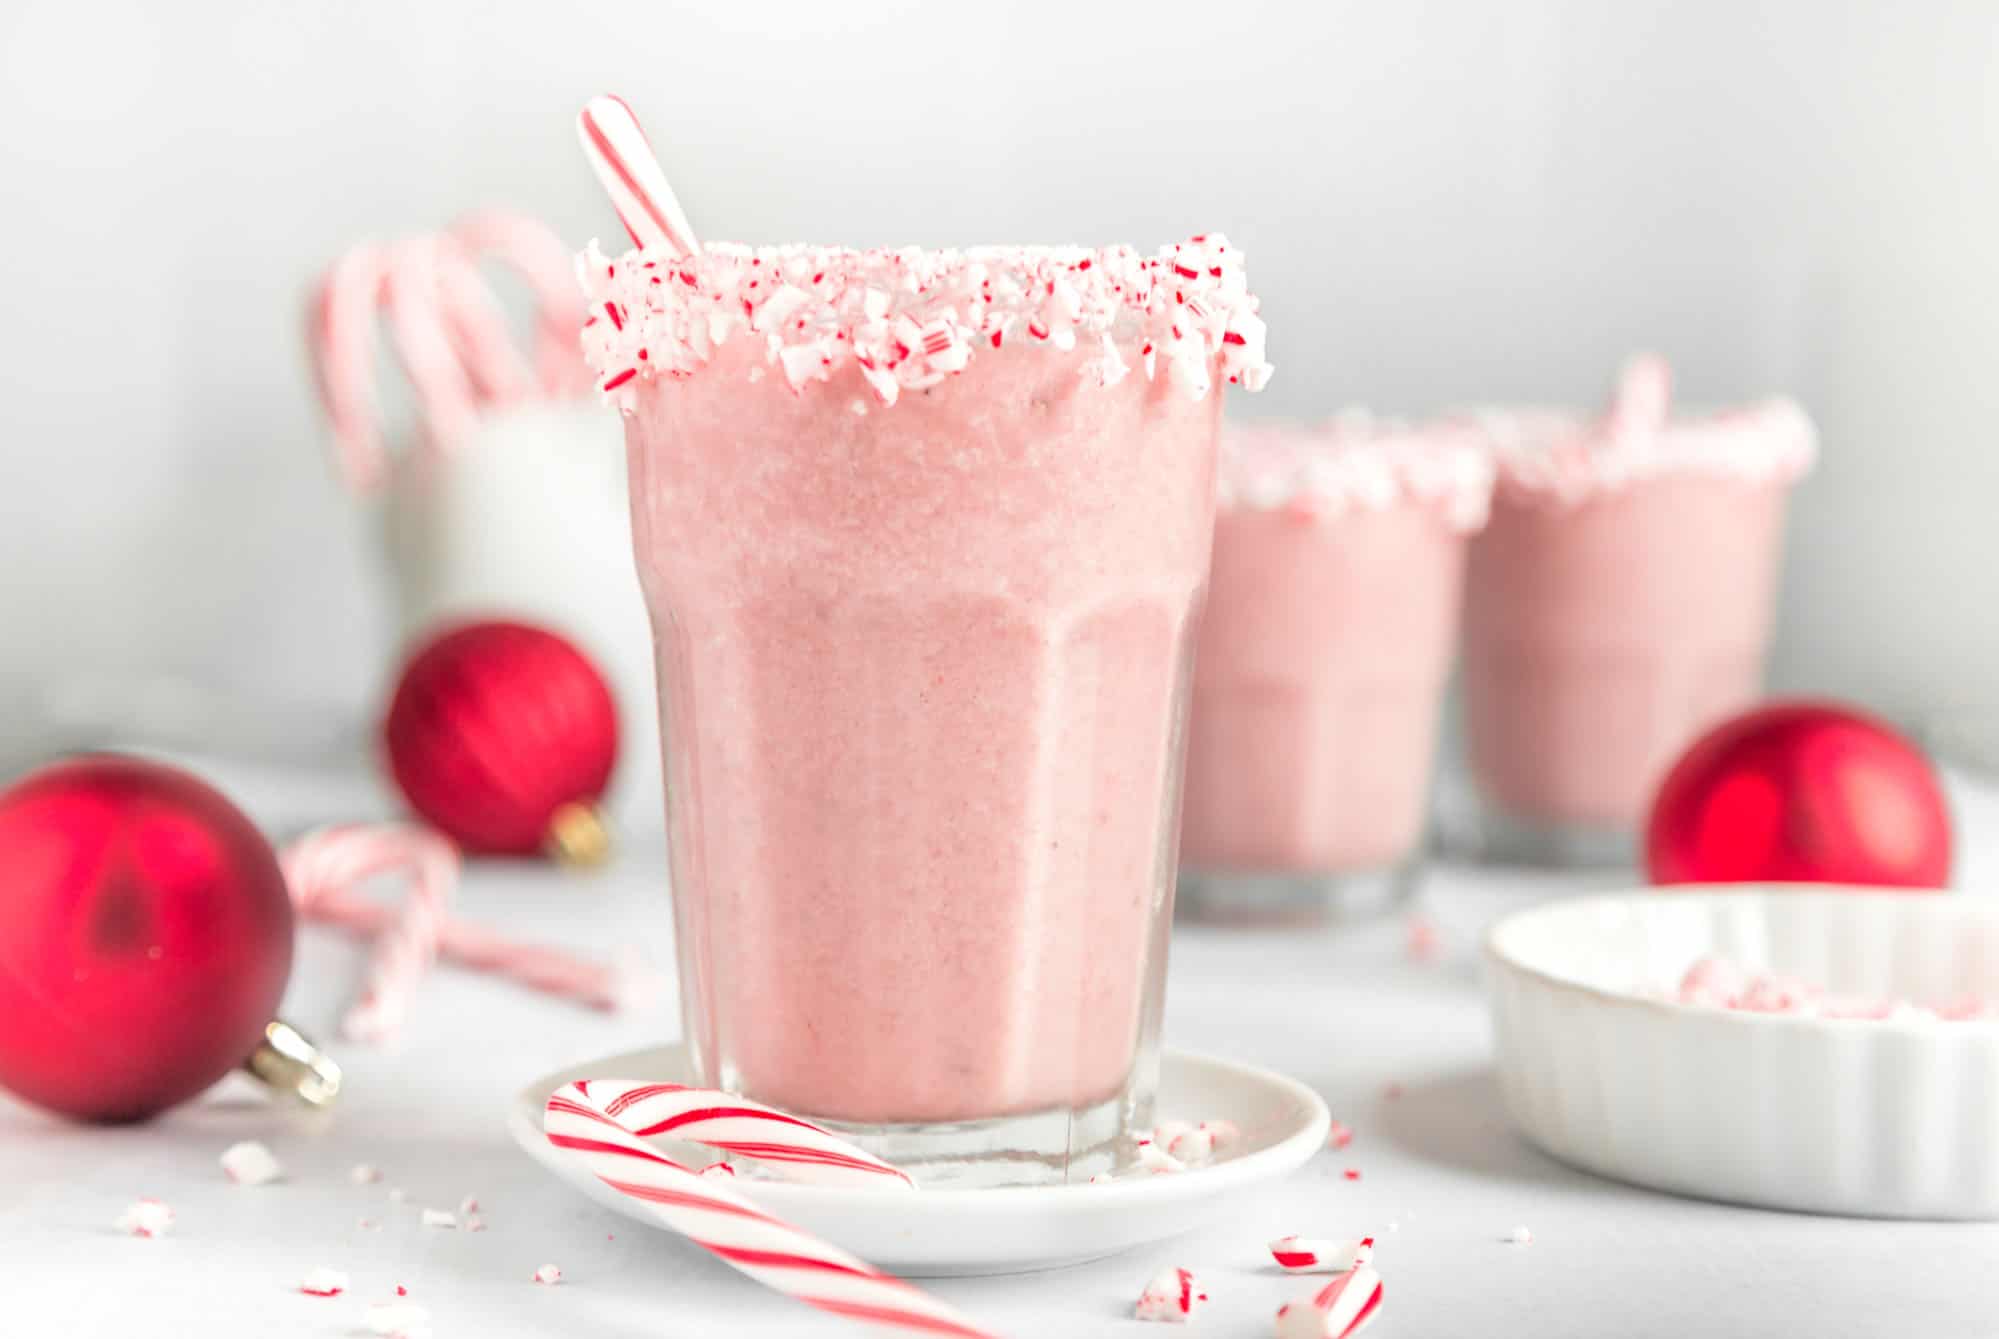 Festive Christmas Smoothie Recipe with Candy Canes and Dragonfruit